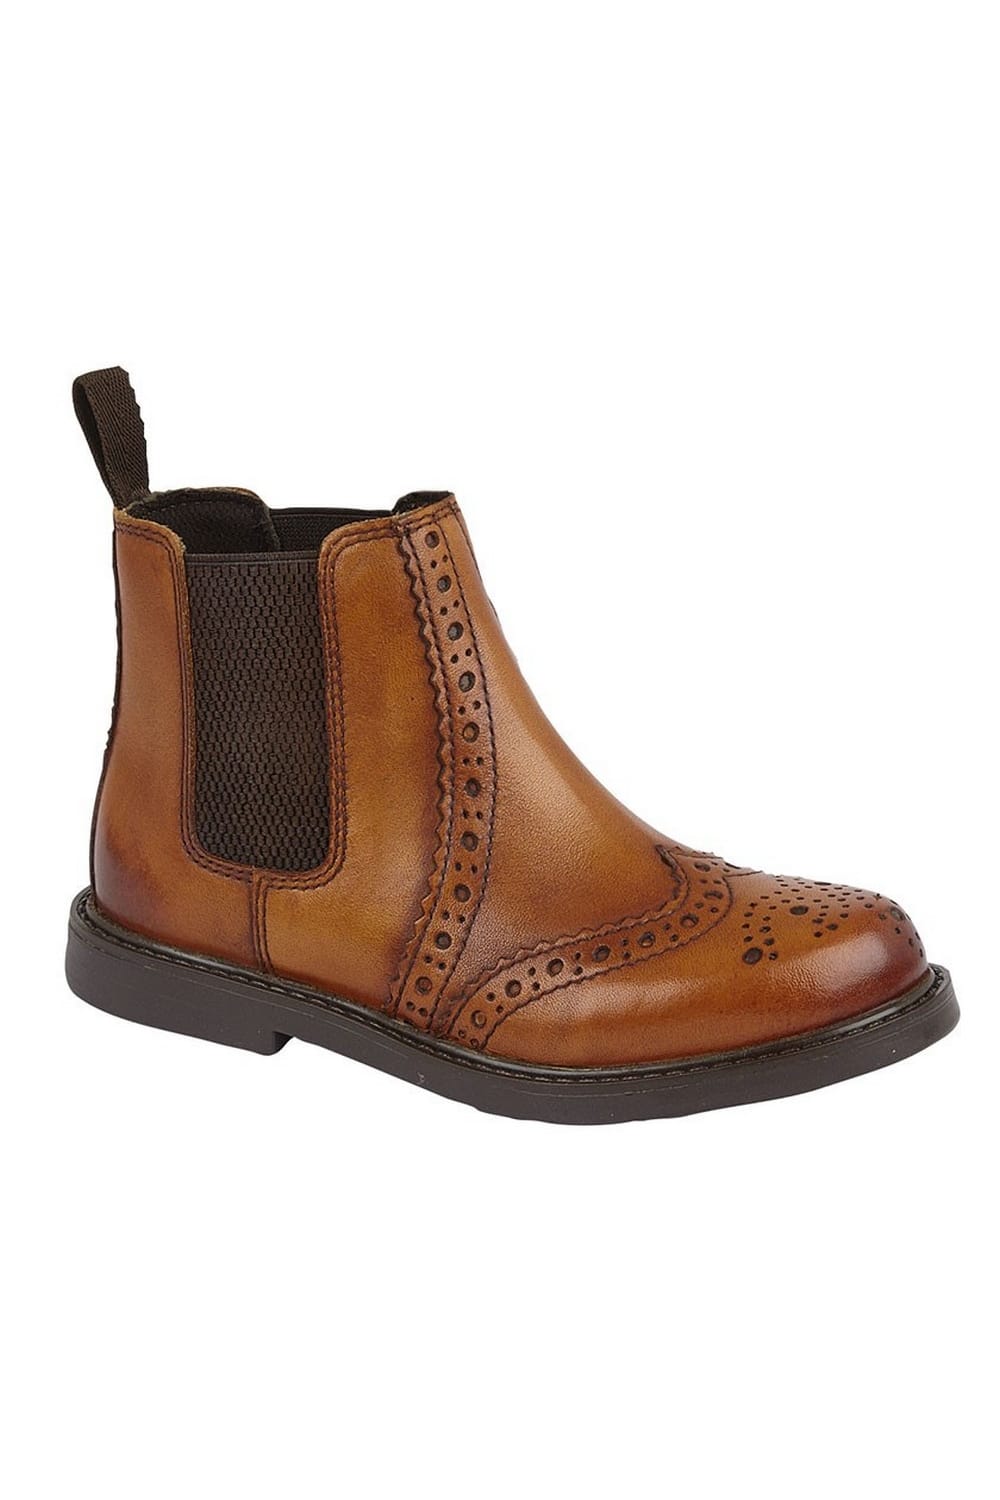 Roamers Boys Leather Ankle Boots (Tan)